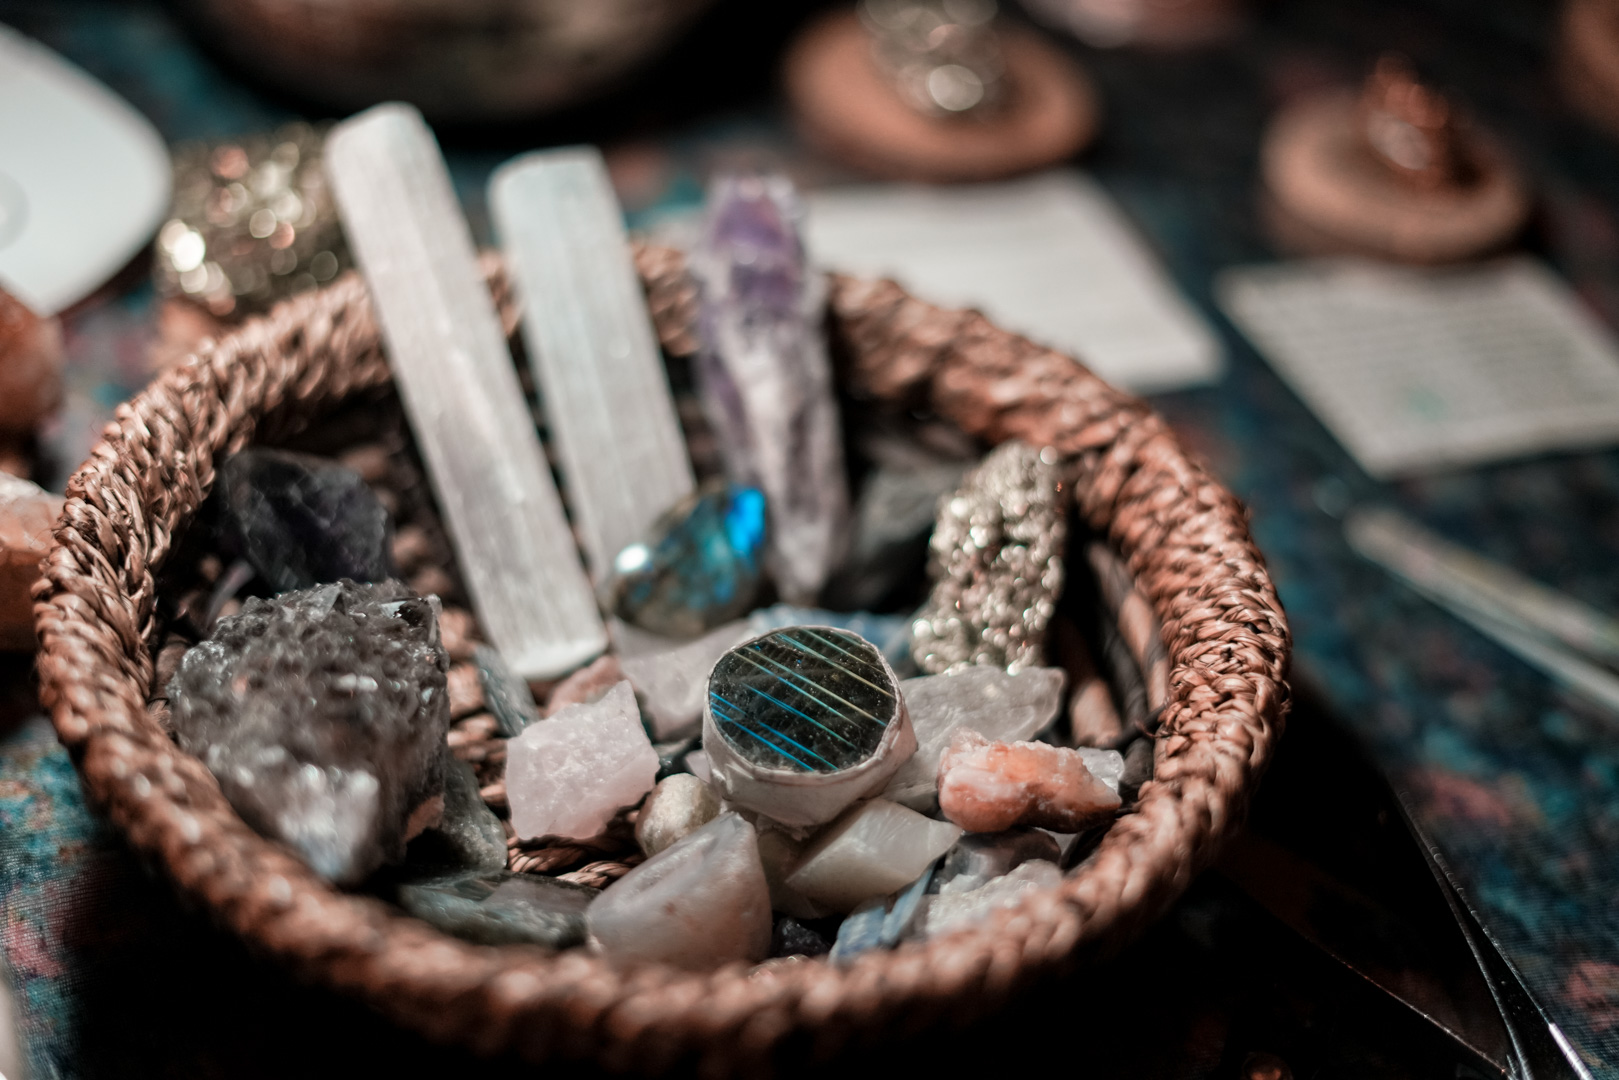 A small basket full of crystals